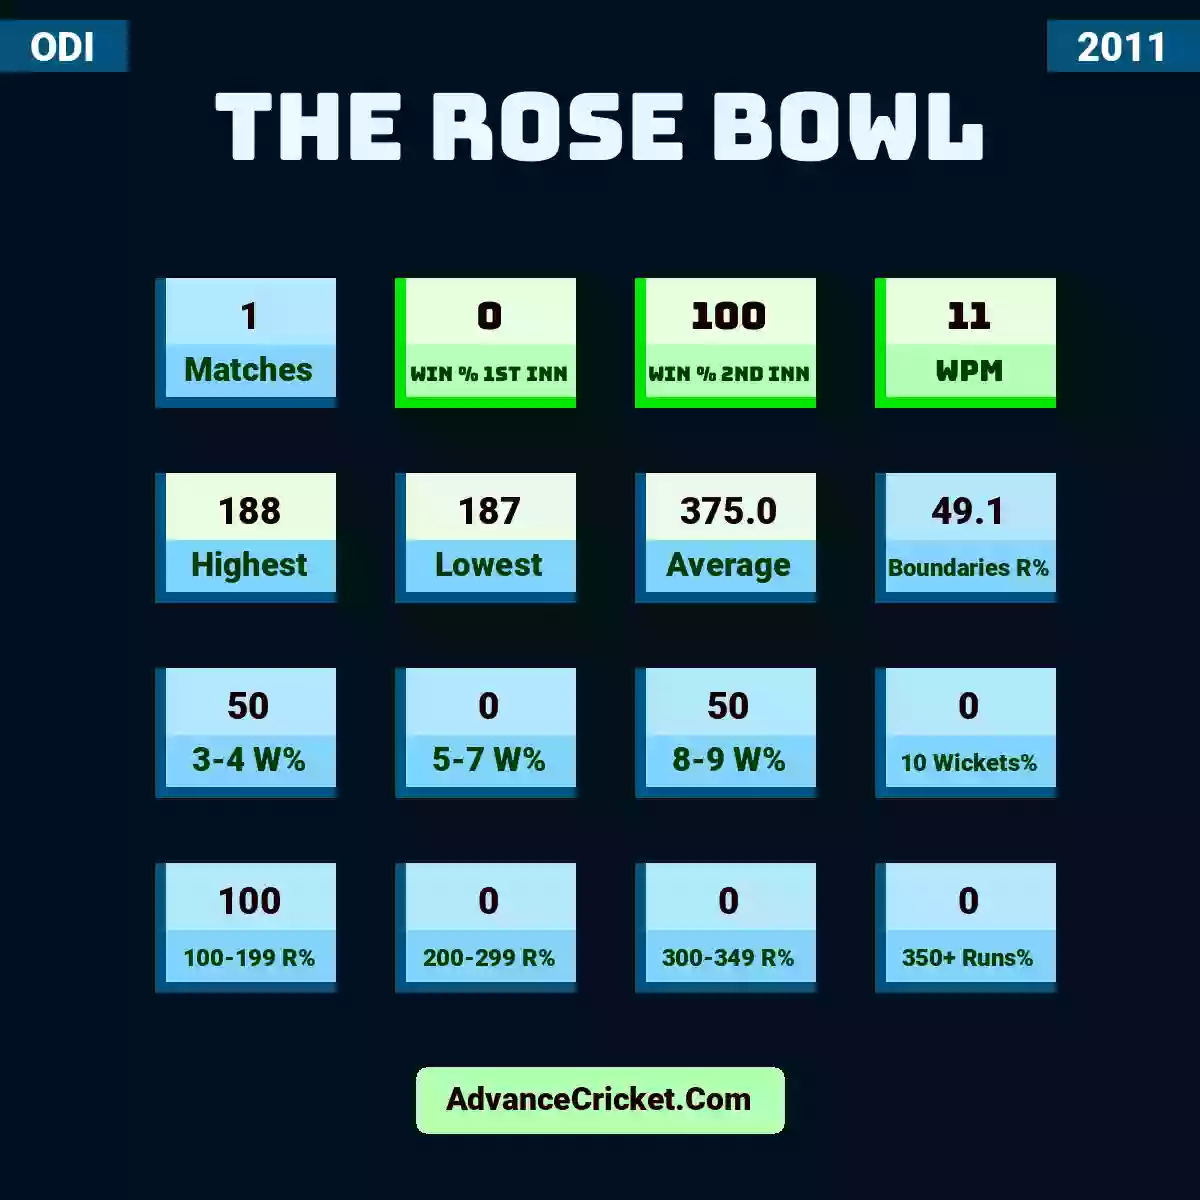 Image showing The Rose Bowl with Matches: 1, Win % 1st Inn: 0, Win % 2nd Inn: 100, WPM: 11, Highest: 188, Lowest: 187, Average: 375.0, Boundaries R%: 49.1, 3-4 W%: 50, 5-7 W%: 0, 8-9 W%: 50, 10 Wickets%: 0, 100-199 R%: 100, 200-299 R%: 0, 300-349 R%: 0, 350+ Runs%: 0.